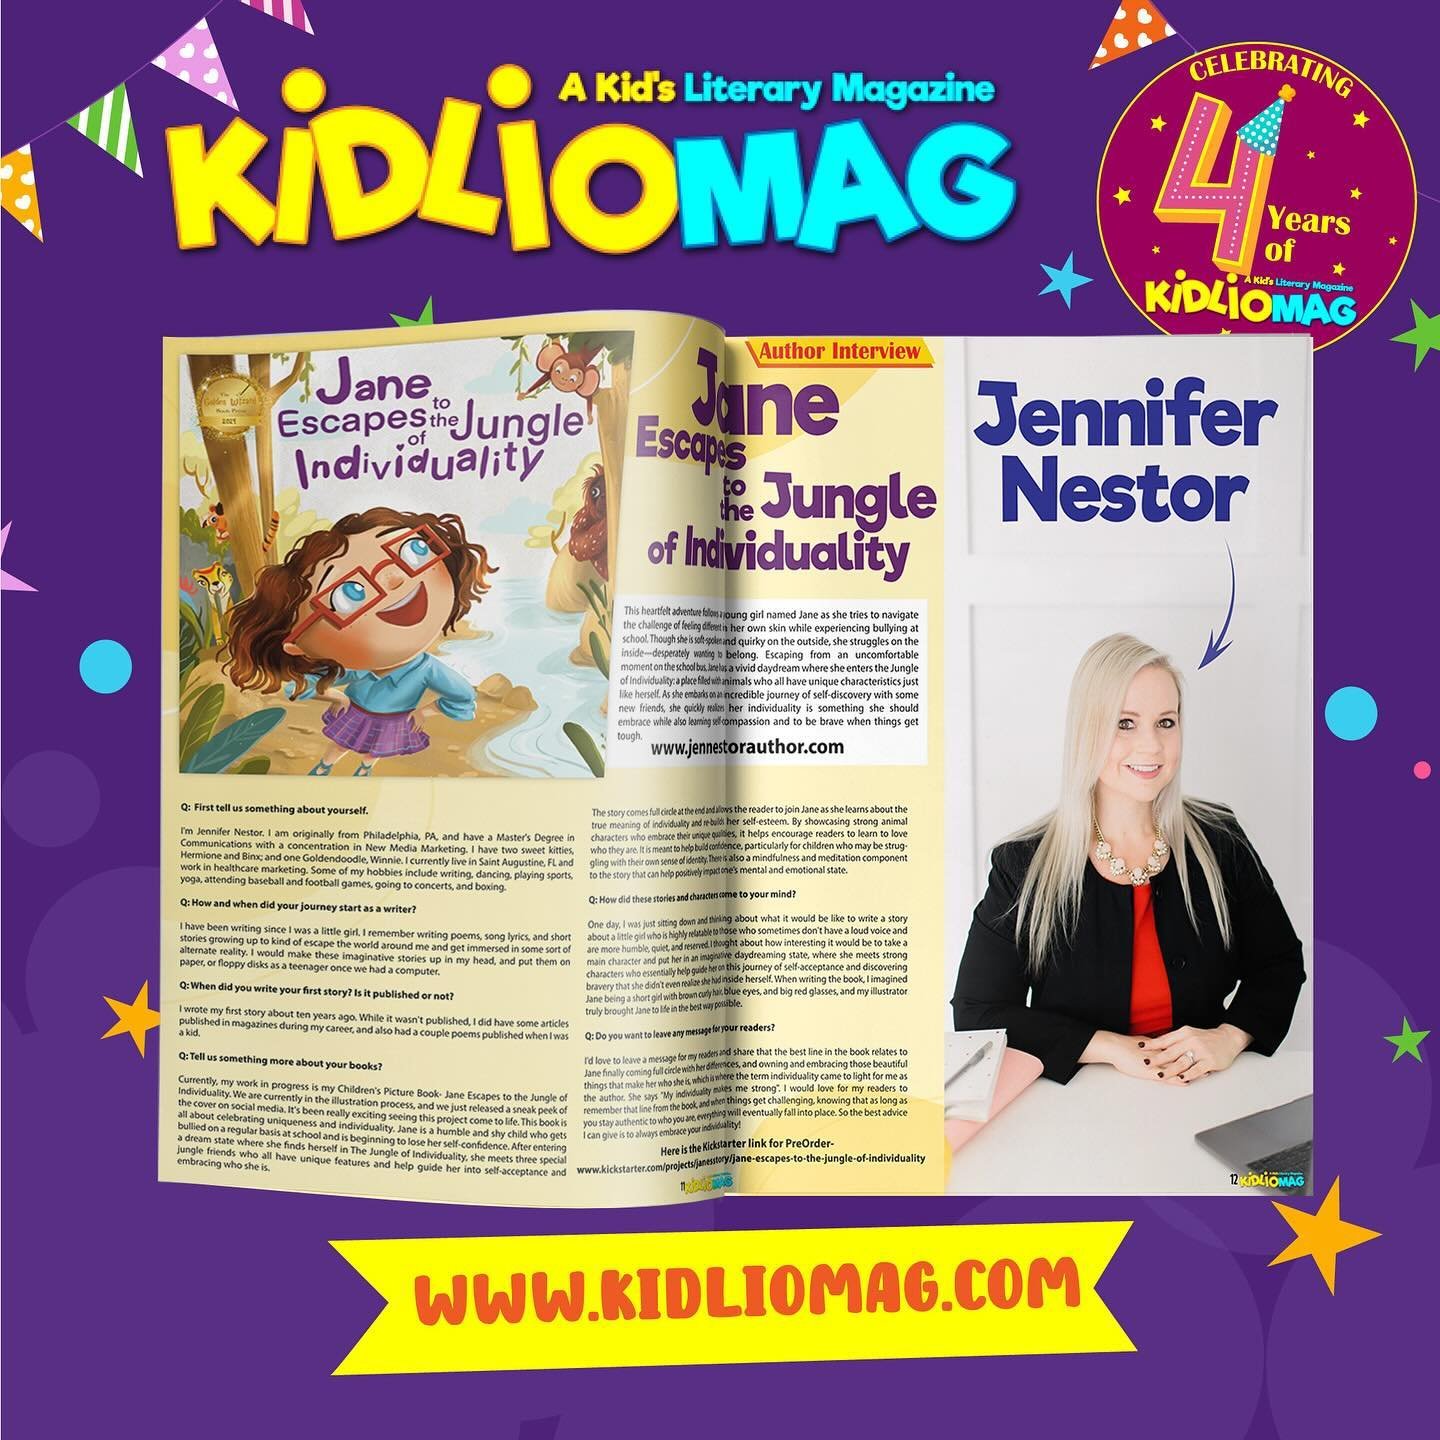 Happy 4th Anniversary to @kidliomag! I&rsquo;m excited to announce that my Author Q&amp;A article is now live inside the May Anniversary edition of the magazine! 🤩🎊

If you&rsquo;re wondering where the inspiration behind Jane Escapes to the Jungle 